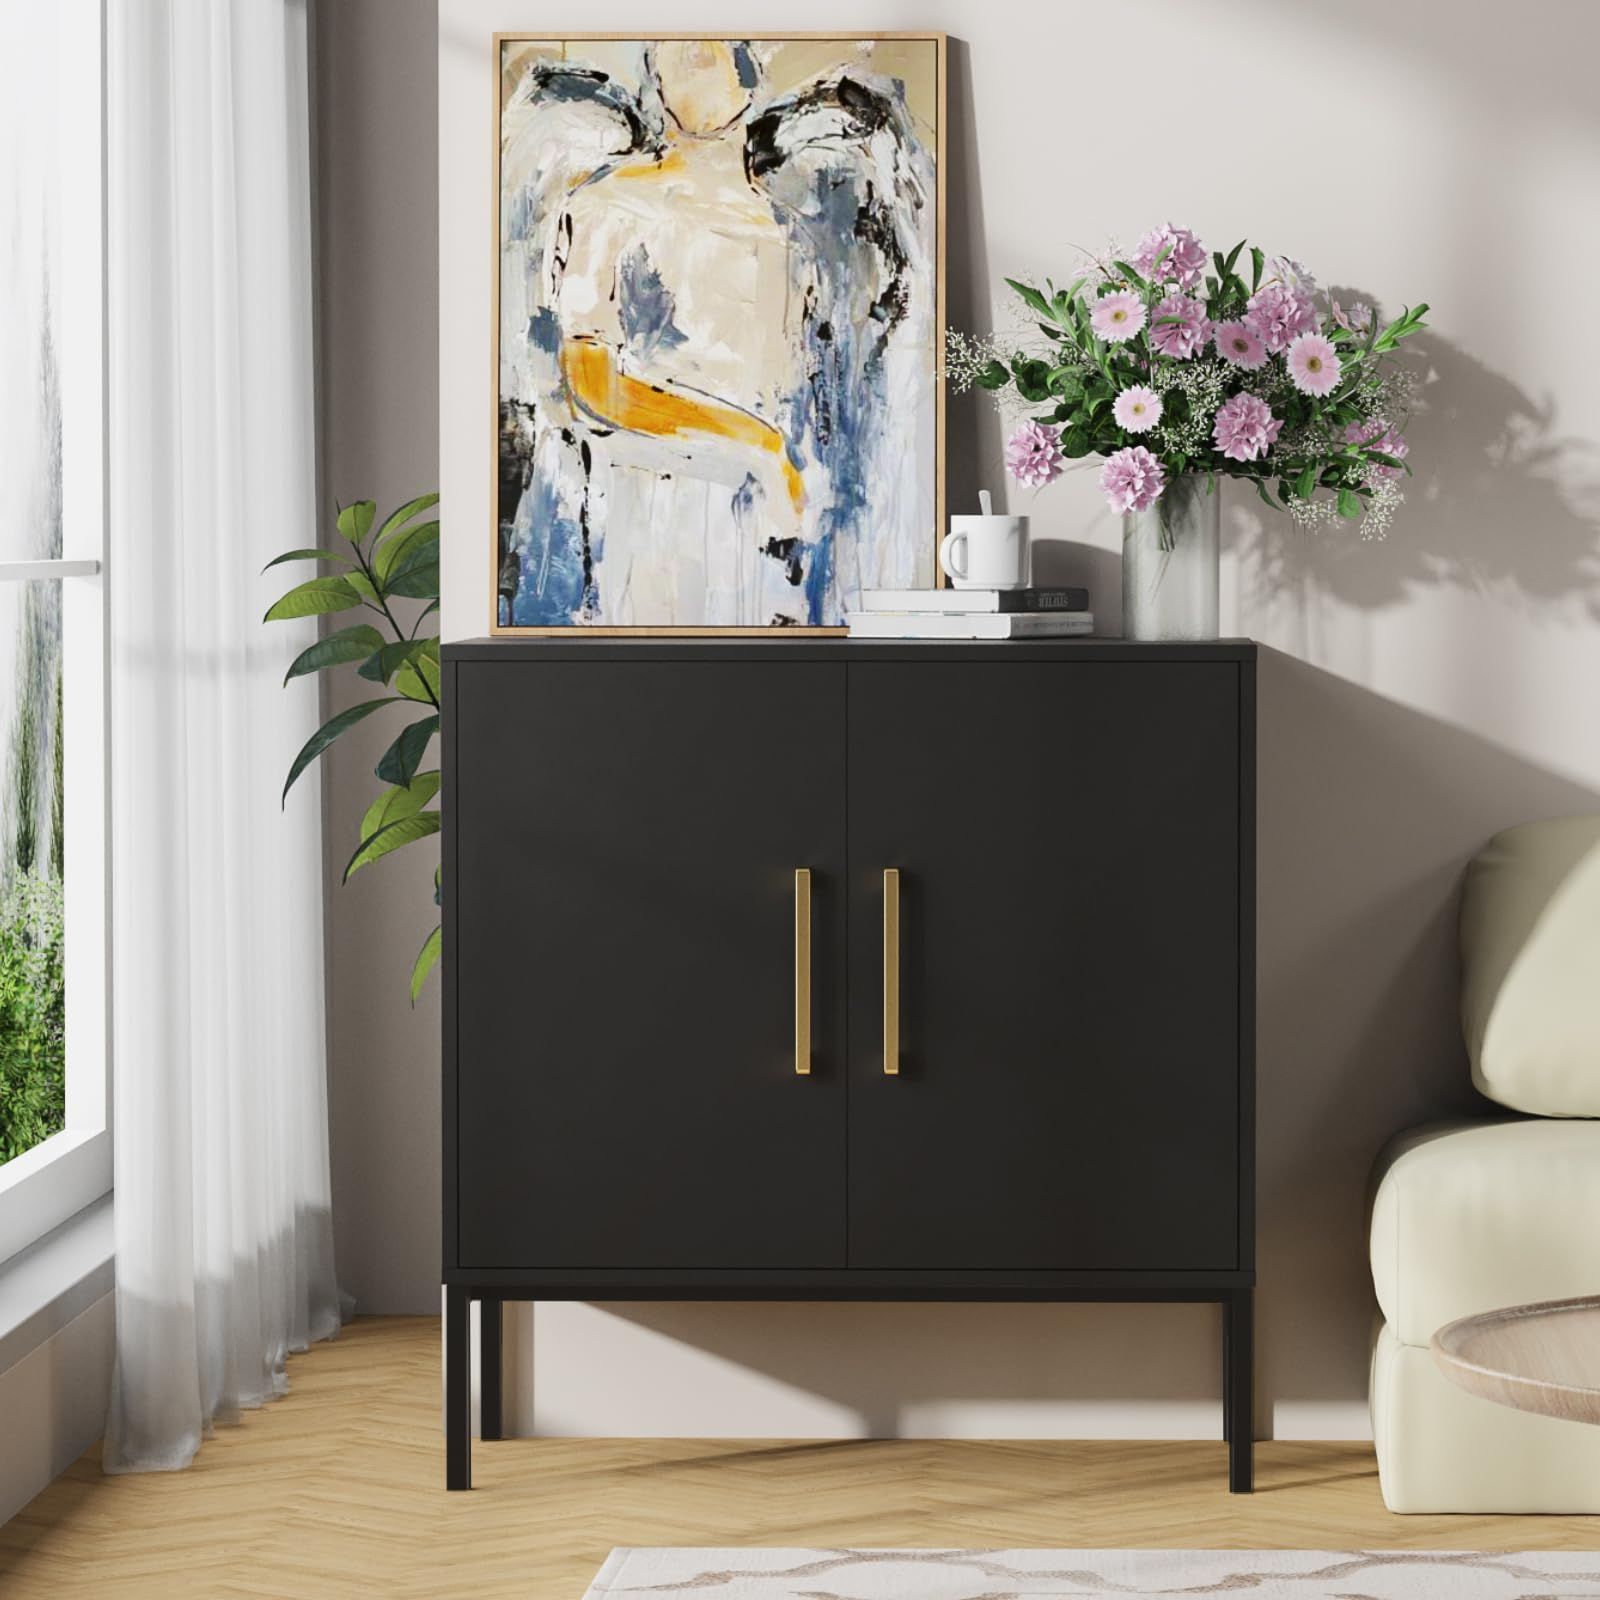 Sideboards Accent Cabinet Regarding Widely Used Amazon: Resom Modern Storage Cabinet With Double Doors, White Sideboard  With Adjustable Shelves, Accent Cabinet For Living Room, Bedroom, Home  Office And Hallway (black) : Home & Kitchen (Photo 5 of 10)